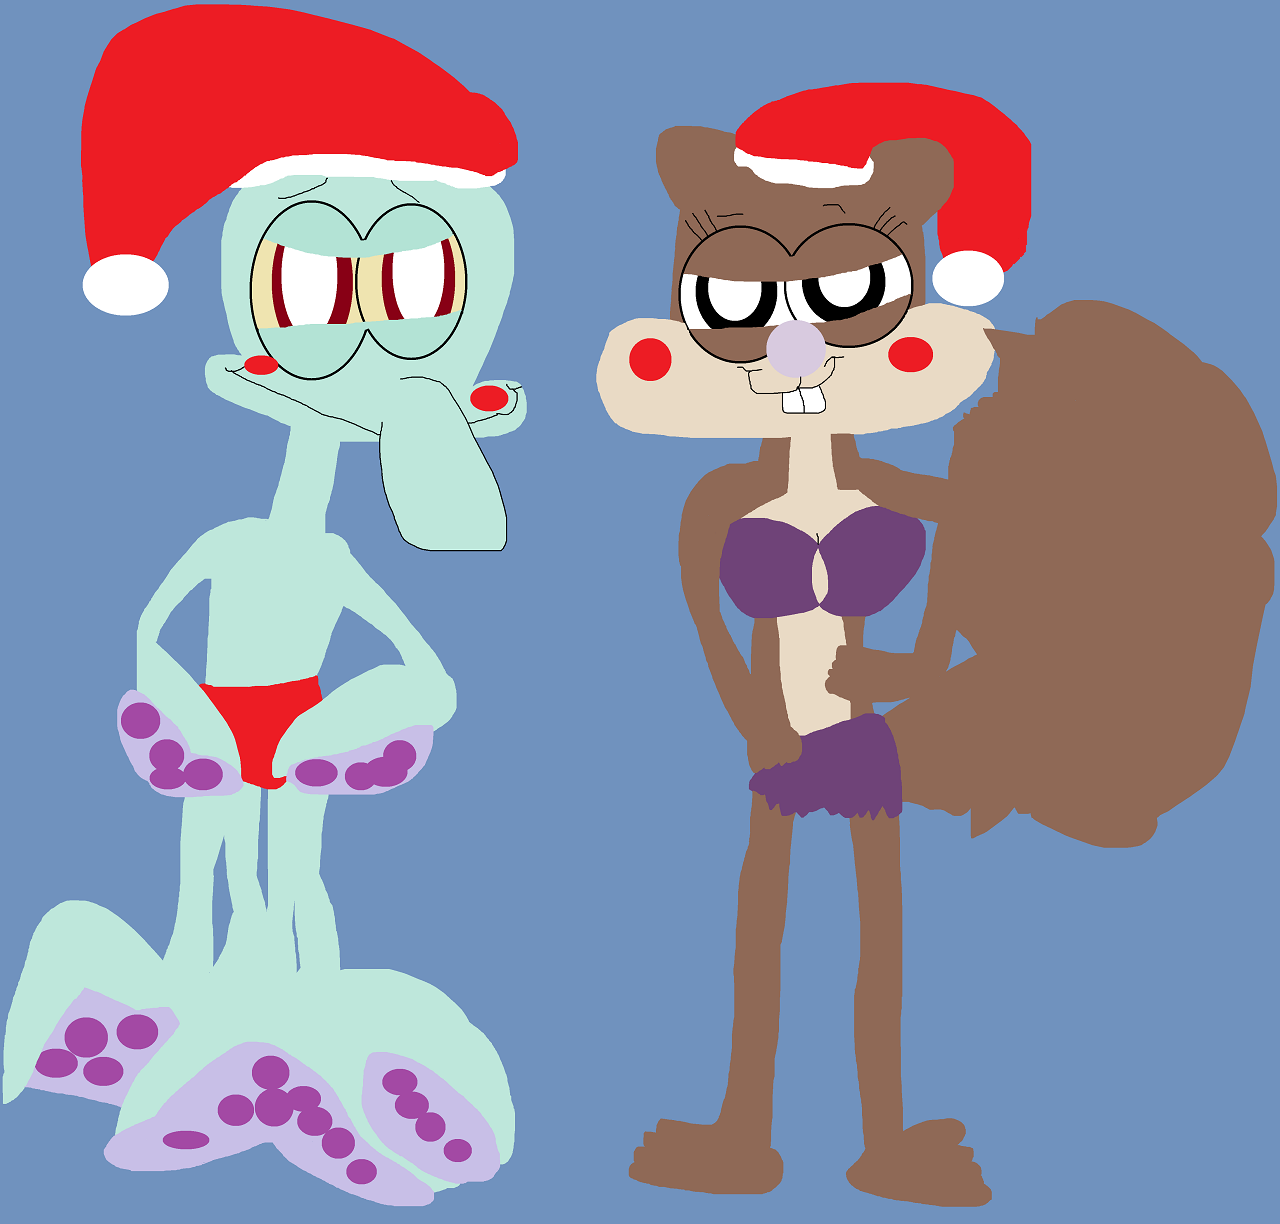 Squidie And Sandy In The Holiday Mood by Falconlobo